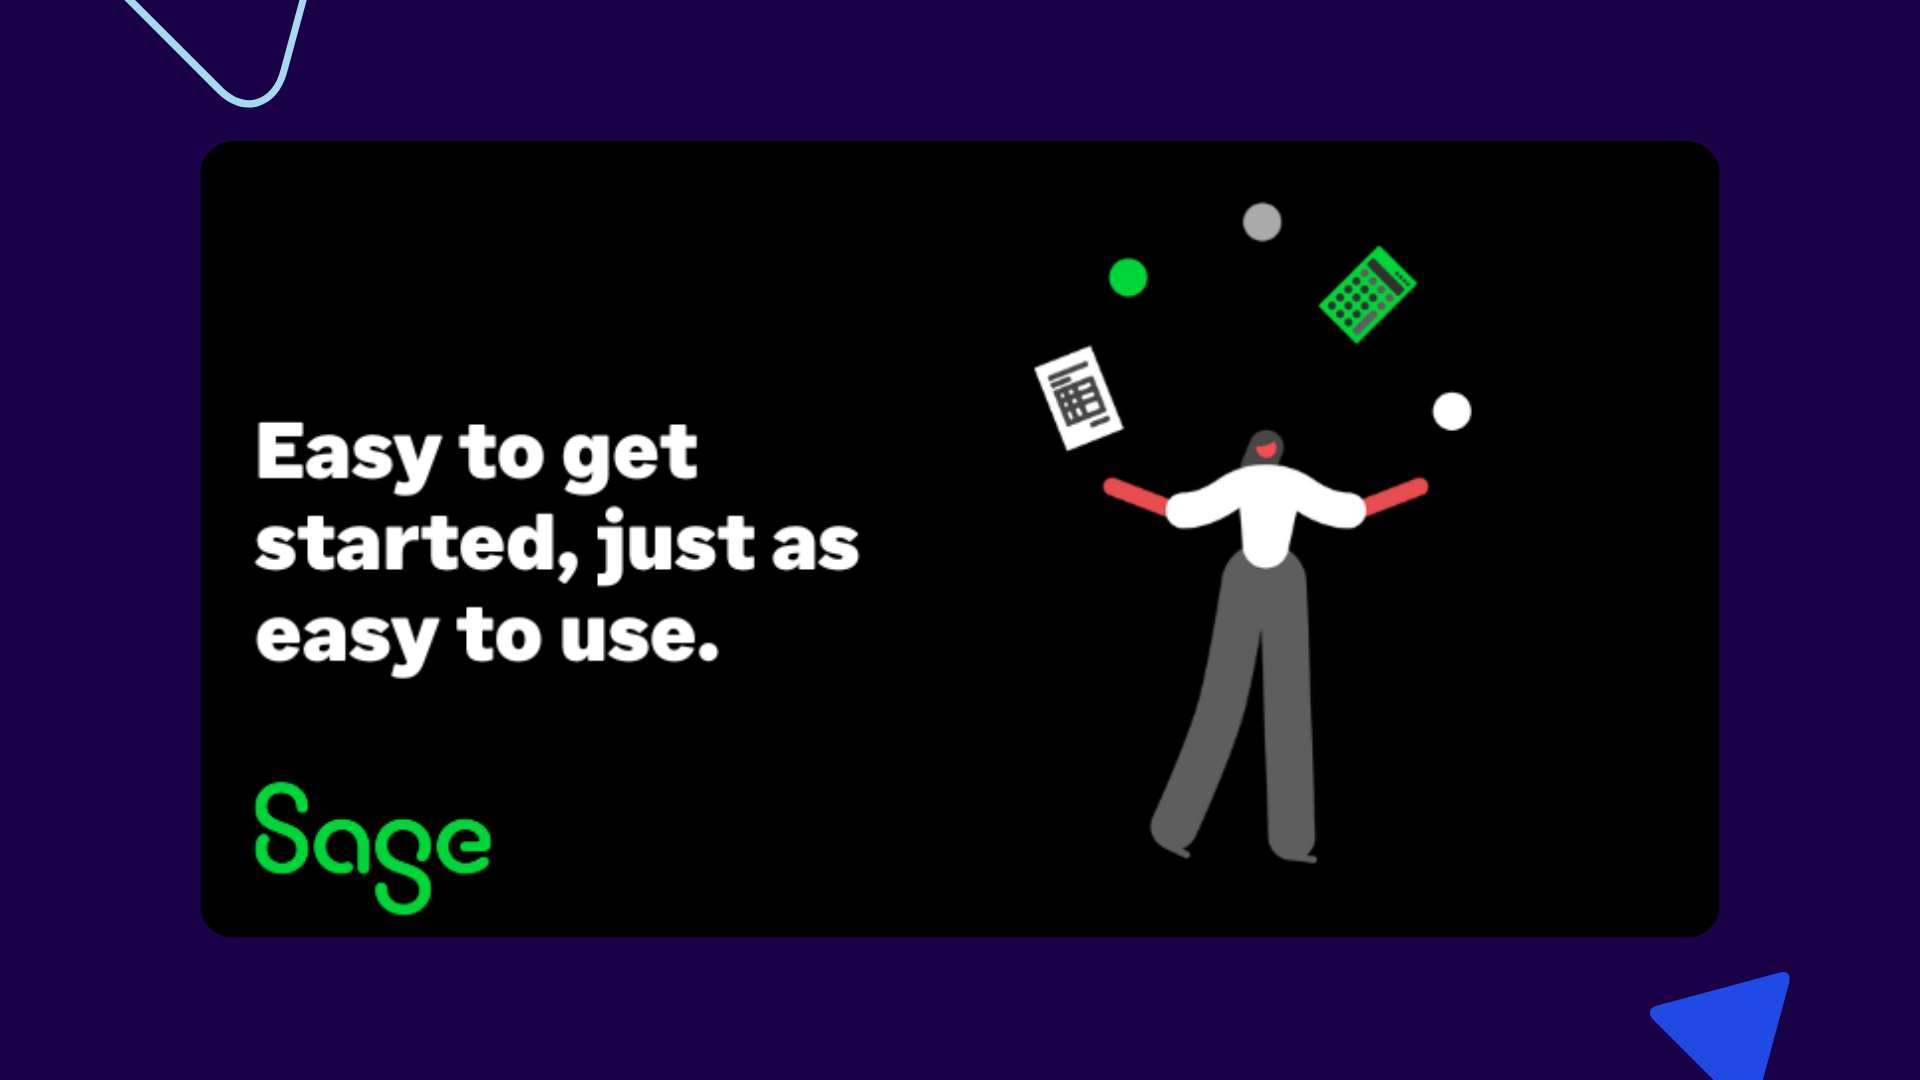 Take control of your finances with Sage Accounting. Even better with AI